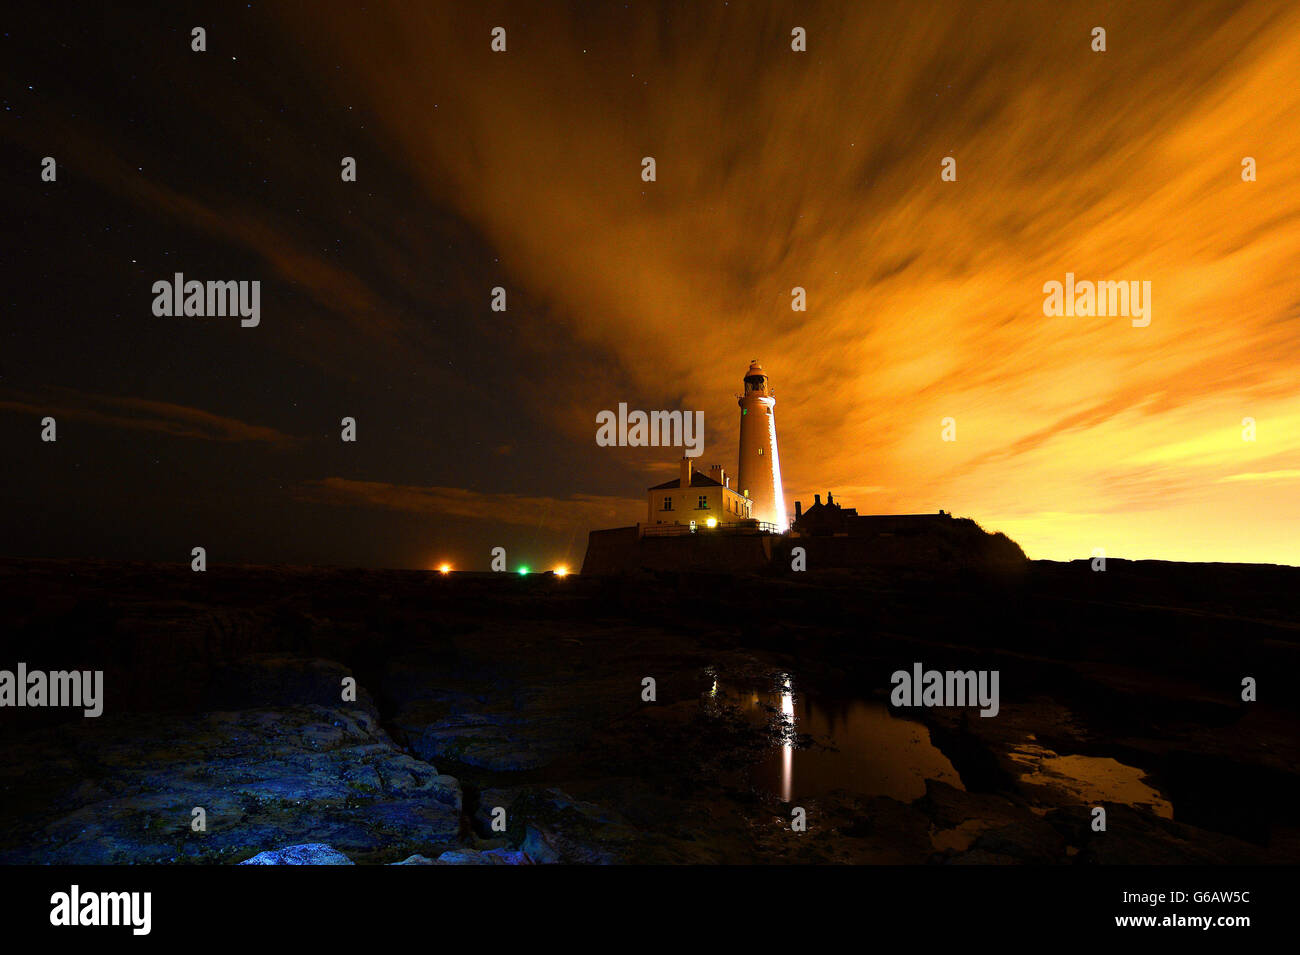 PHOTO TAKEN WITH LONG EXPOSURE A starry sky over St Mary's Lighthouse on the tiny St. Mary's Island, just north of Whitley Bay on the coast of North East England, in the early hours of this morning. Stock Photo